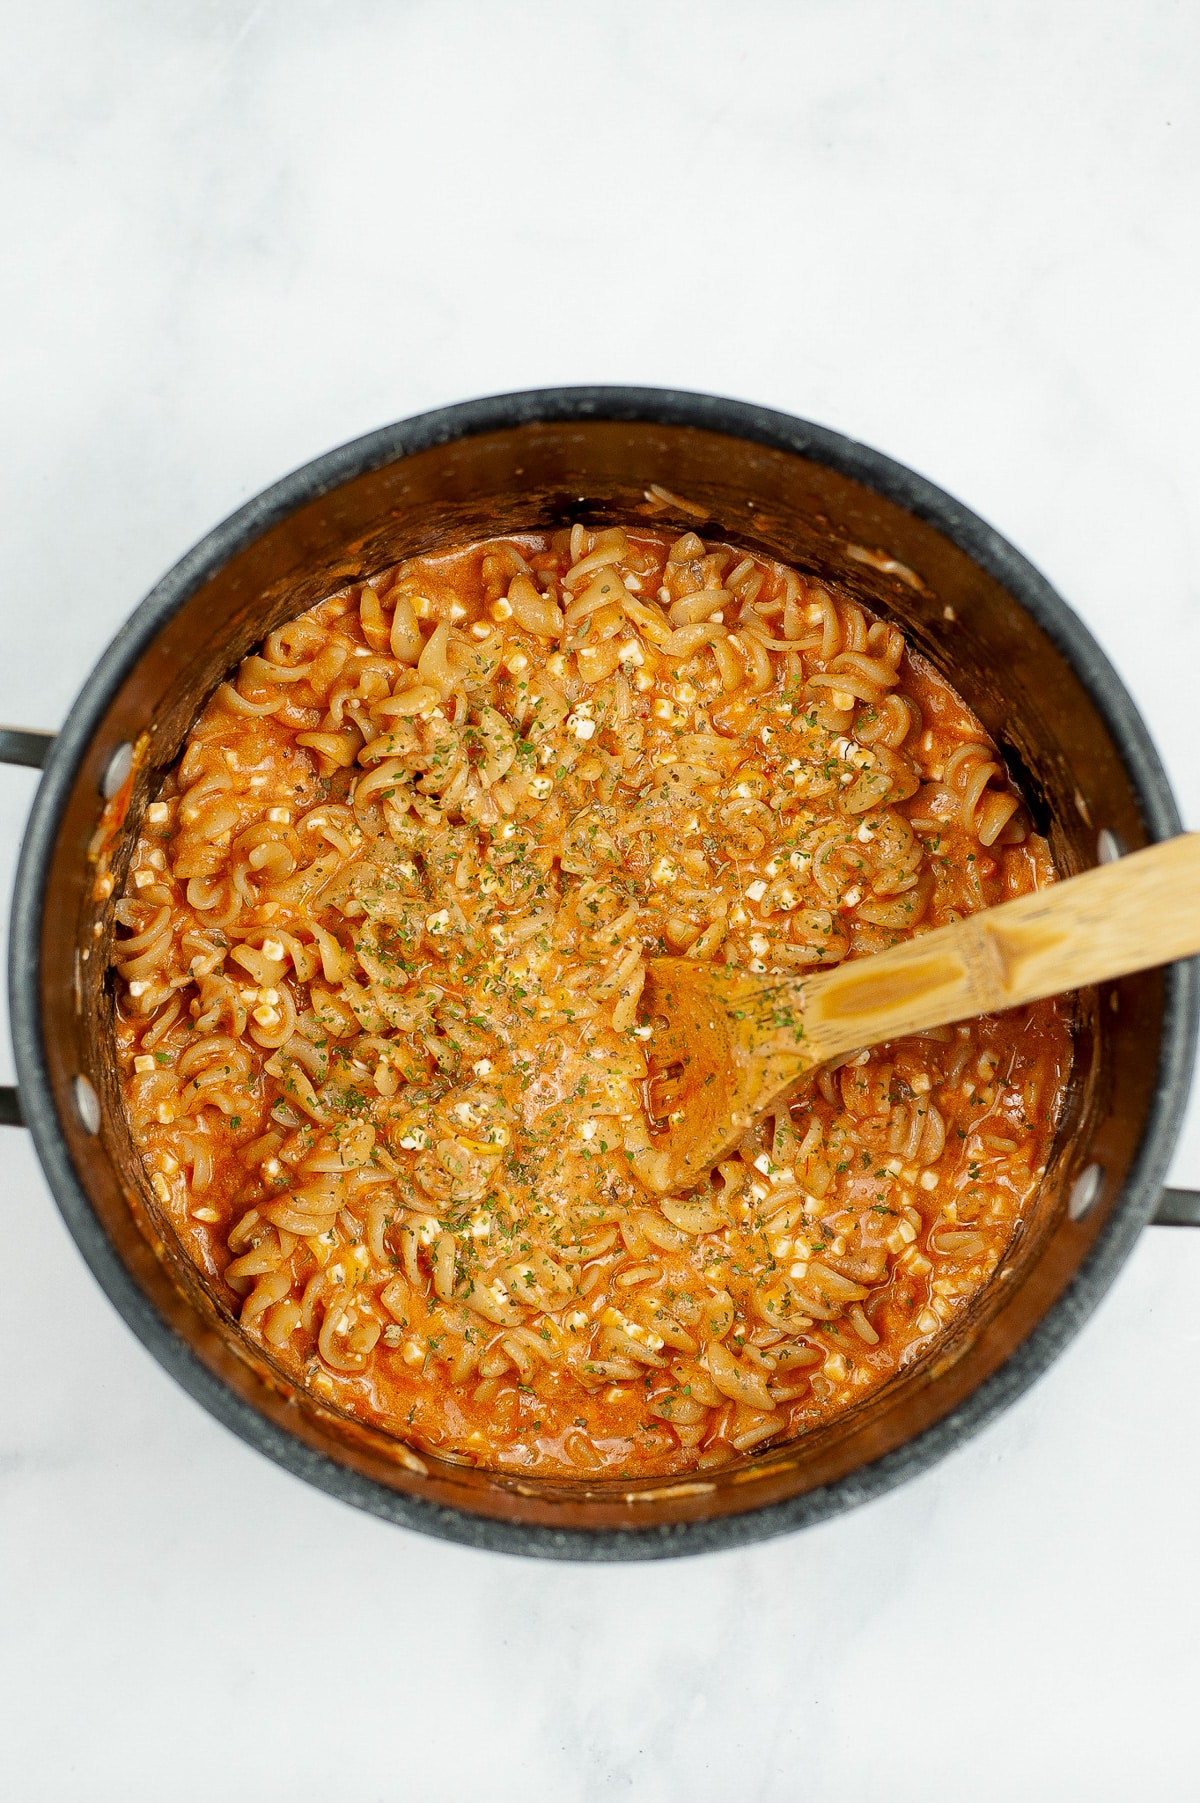 Cheesy rotini pasta cooked and mixed with pasta sauce in a large pot being stirred with a wooden spoon.